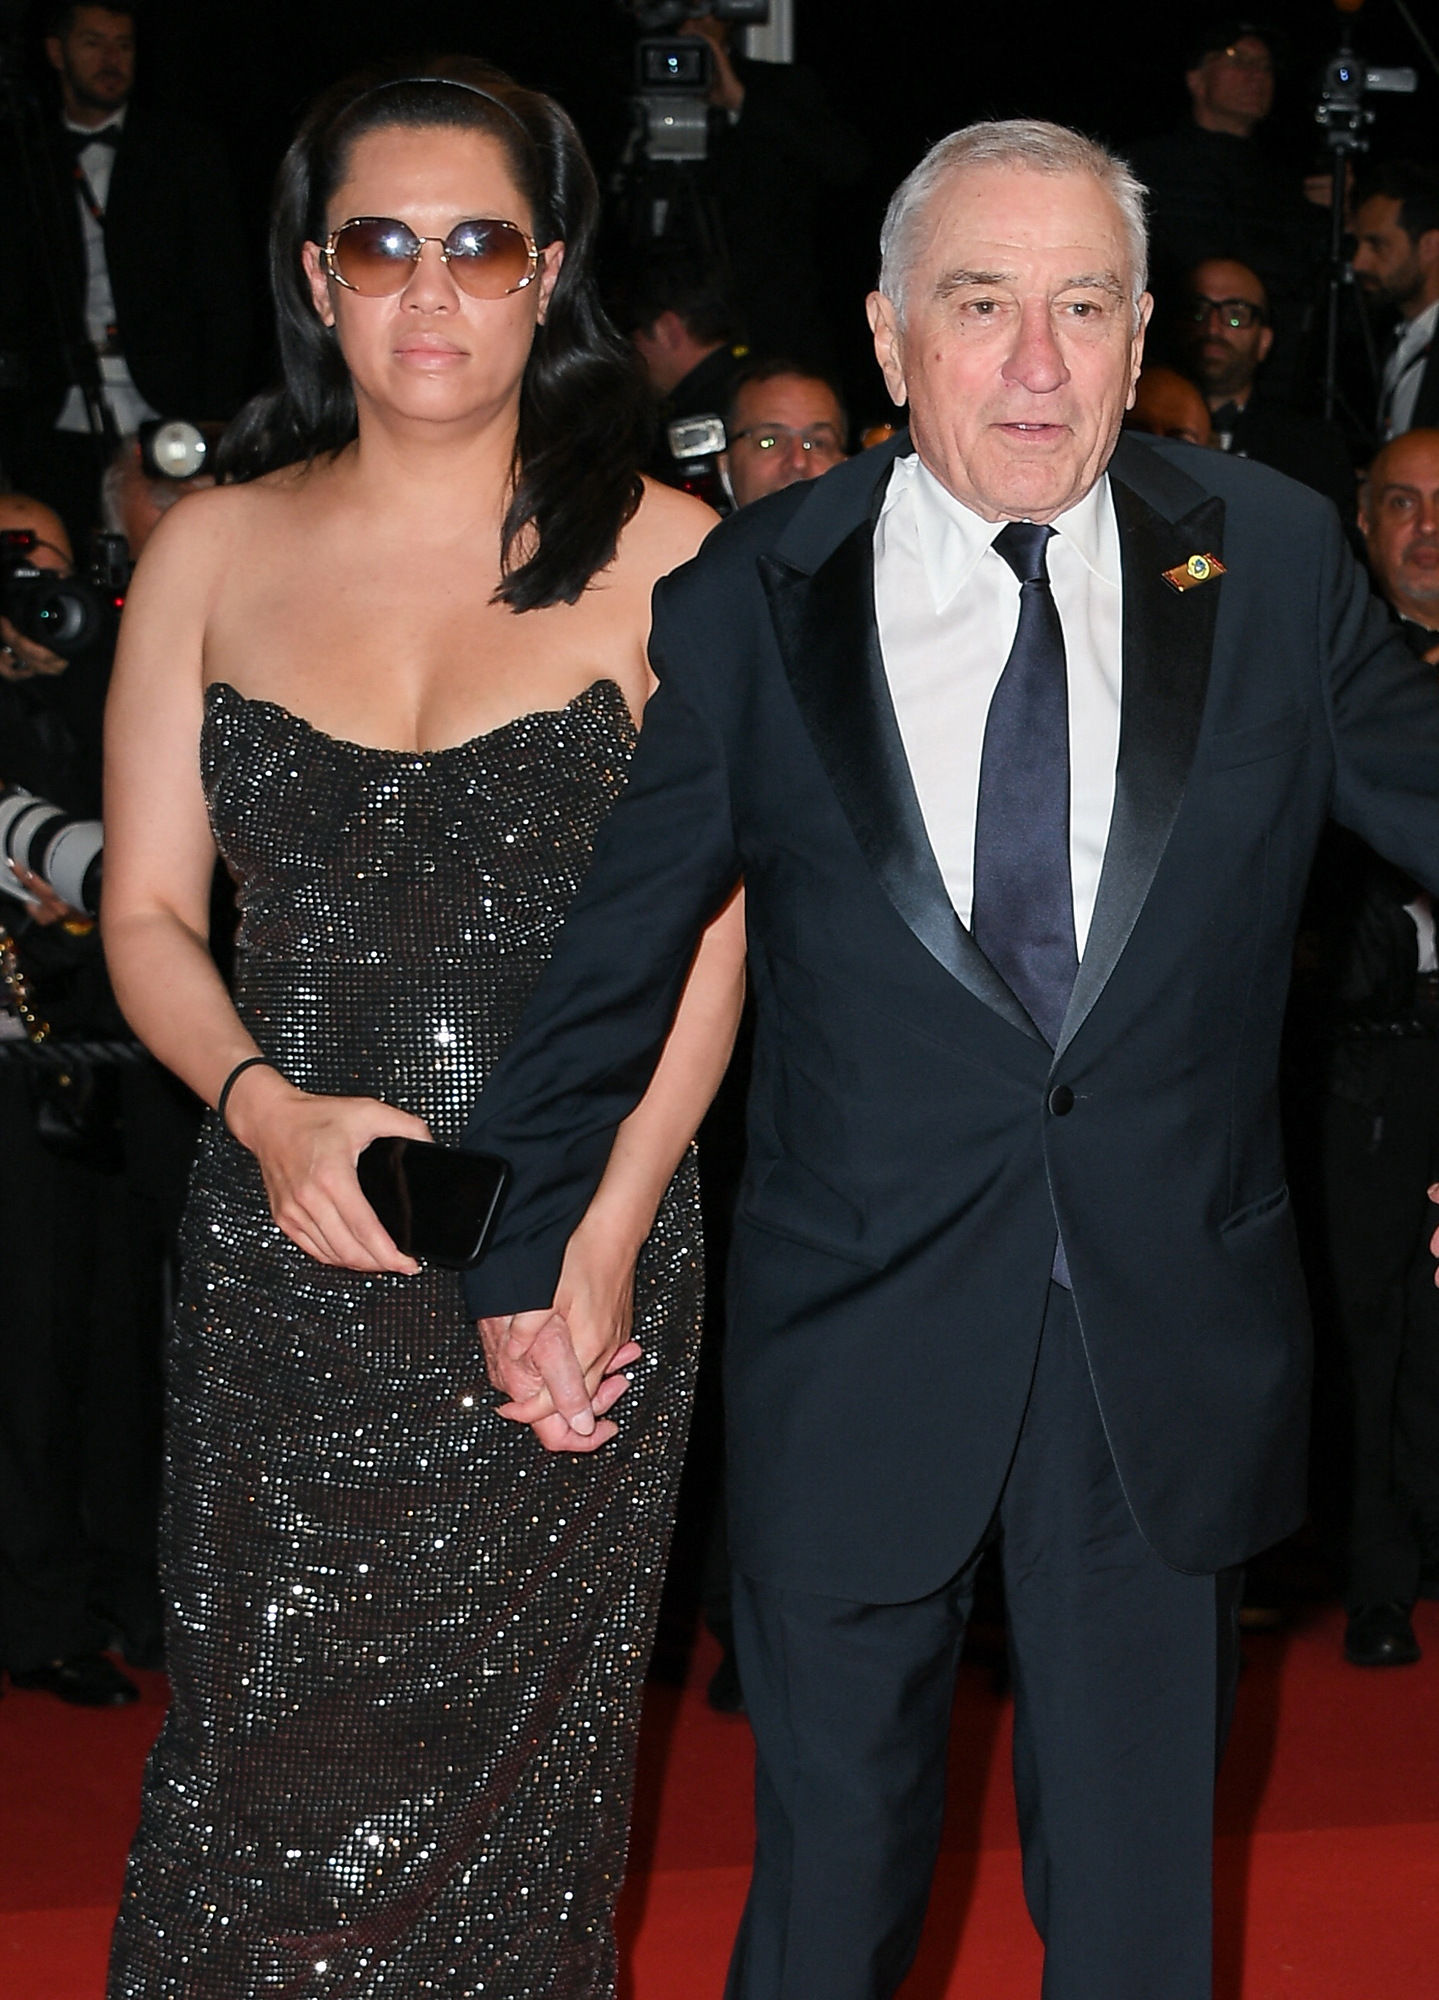 Robert De Niro and Girlfriend Tiffany Chen Stun at Cannes Film Festival After Welcoming Daughter Gia: Photos